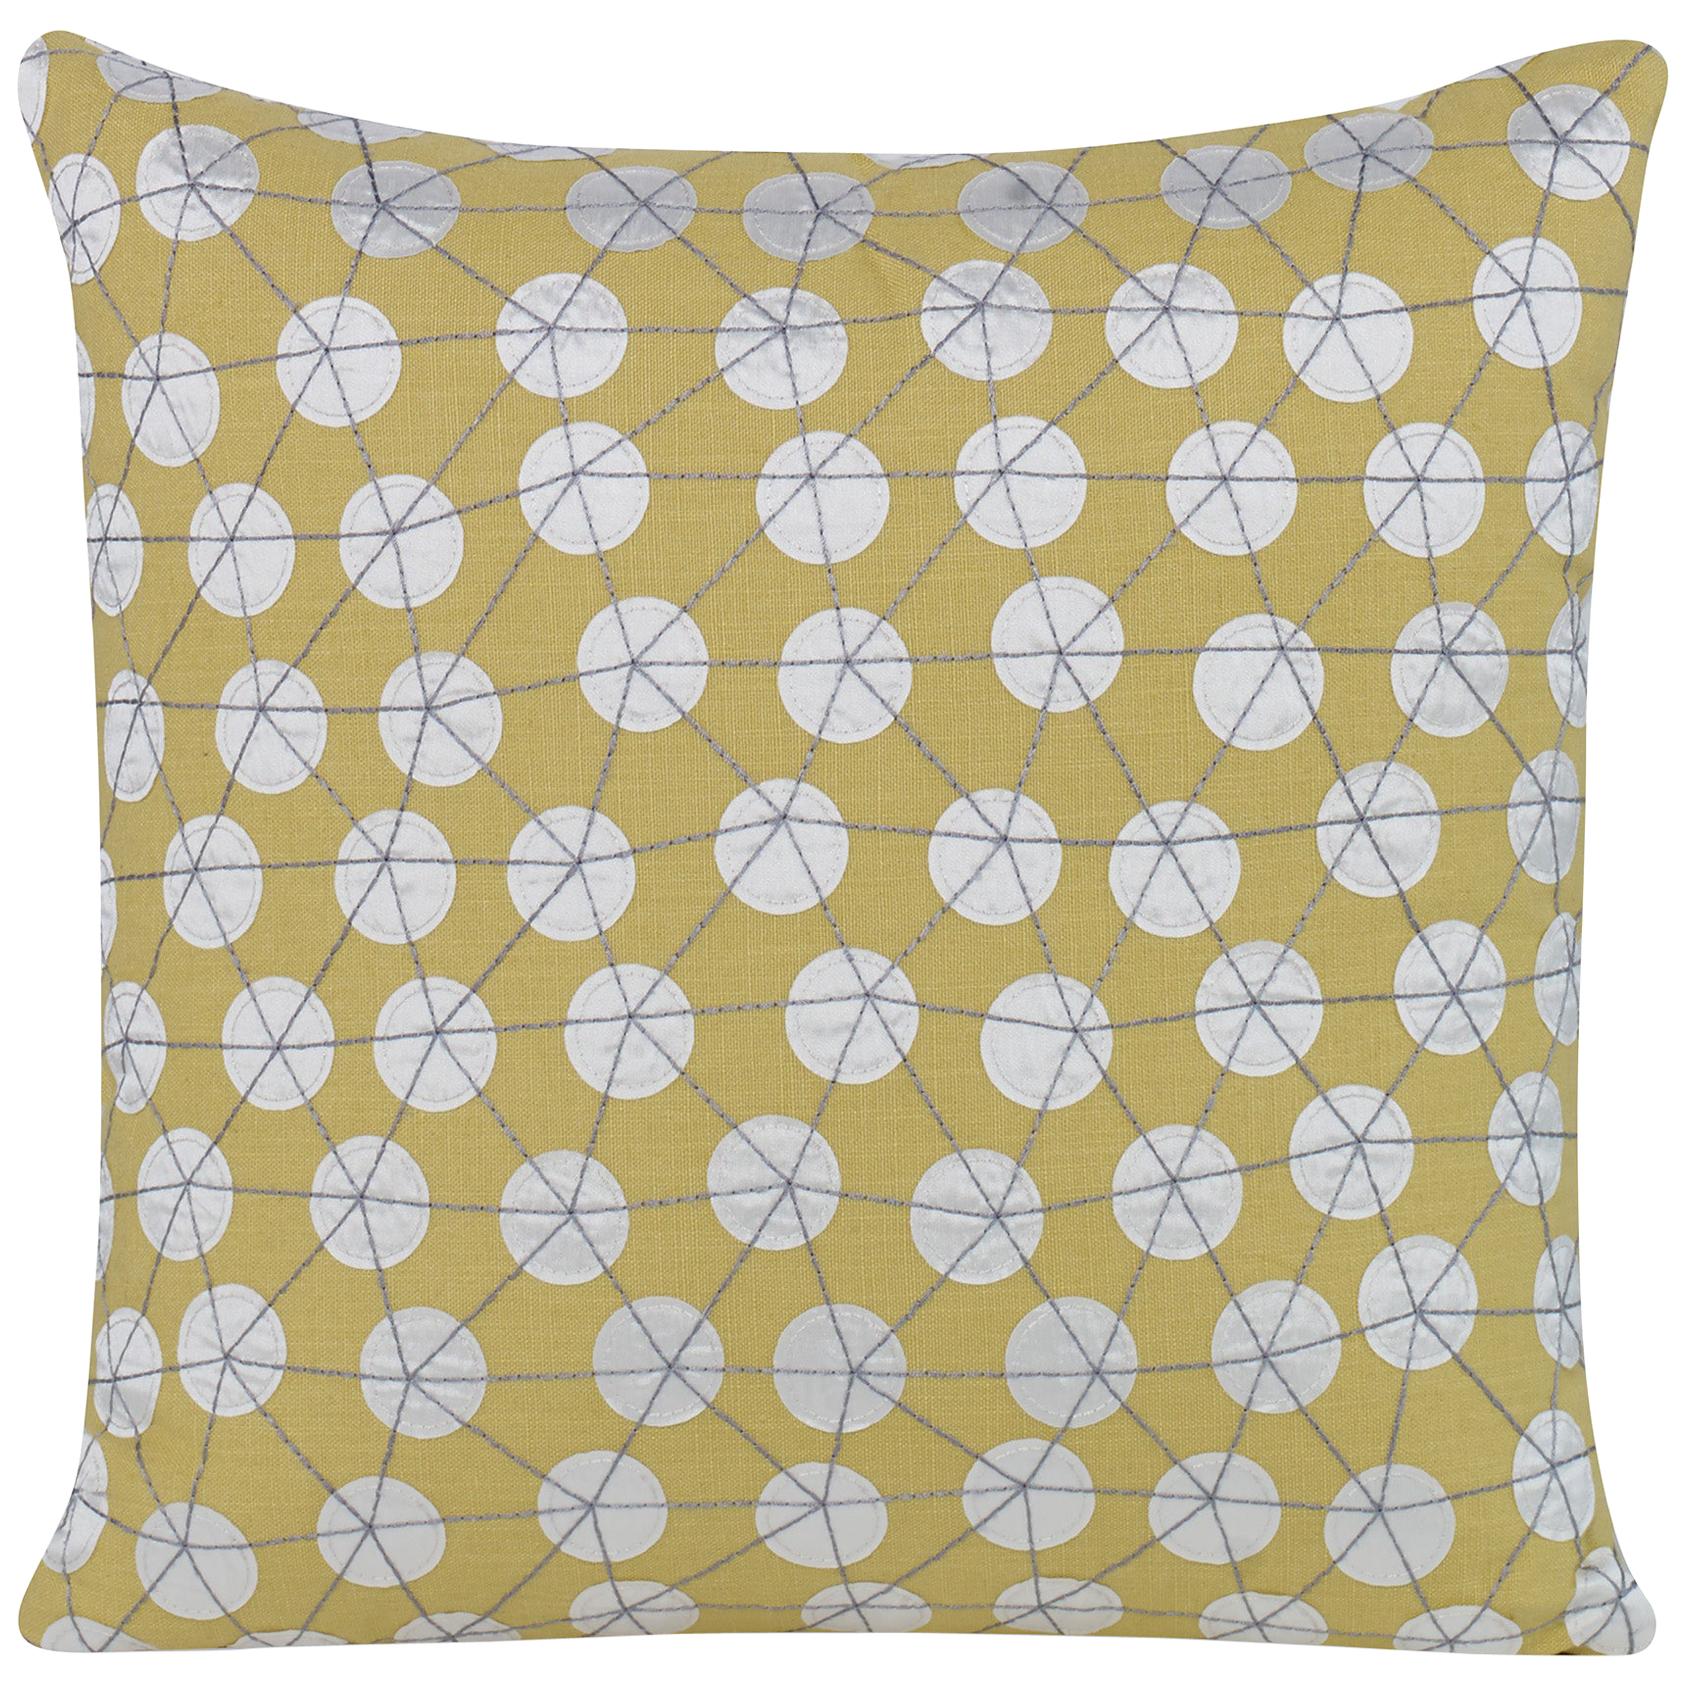 Goaround Pillow in Yellow by Curatedkravet